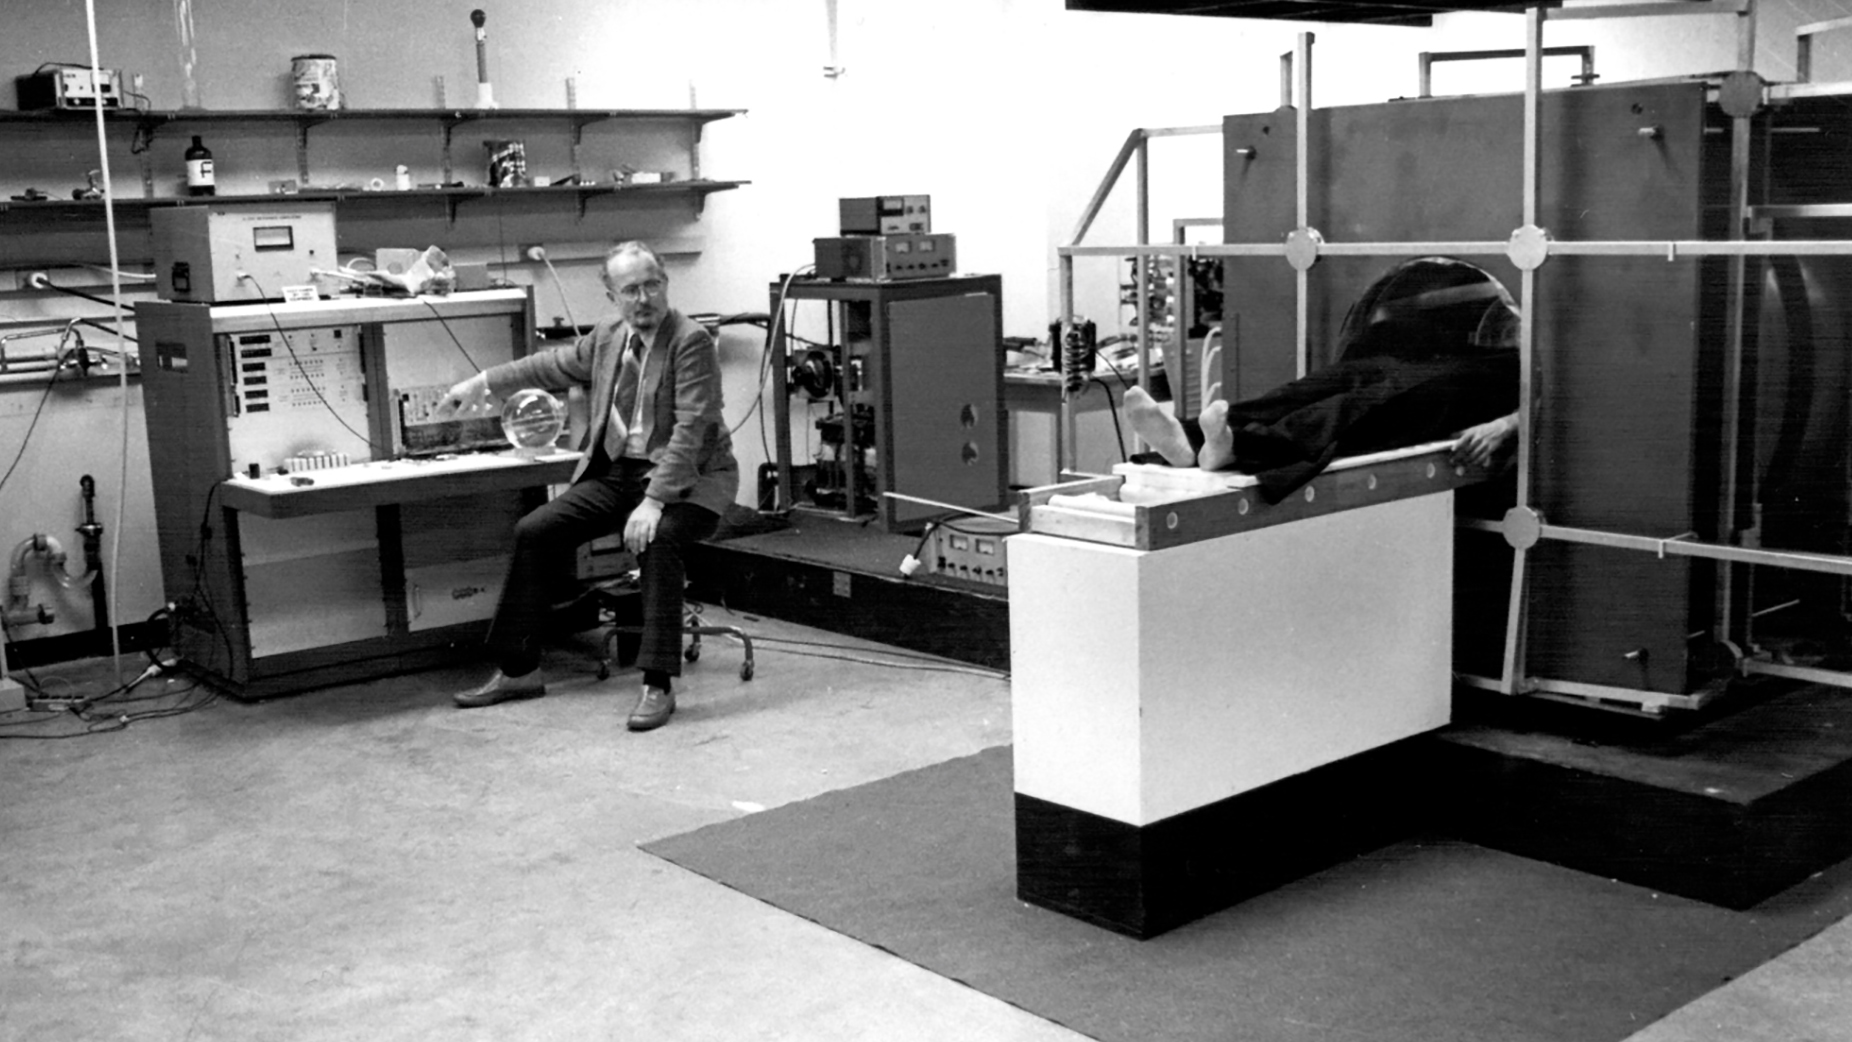 Paul Lauterbur and Big Red, the first human MRI scanner. Photo courtesy of Stony Brook University.